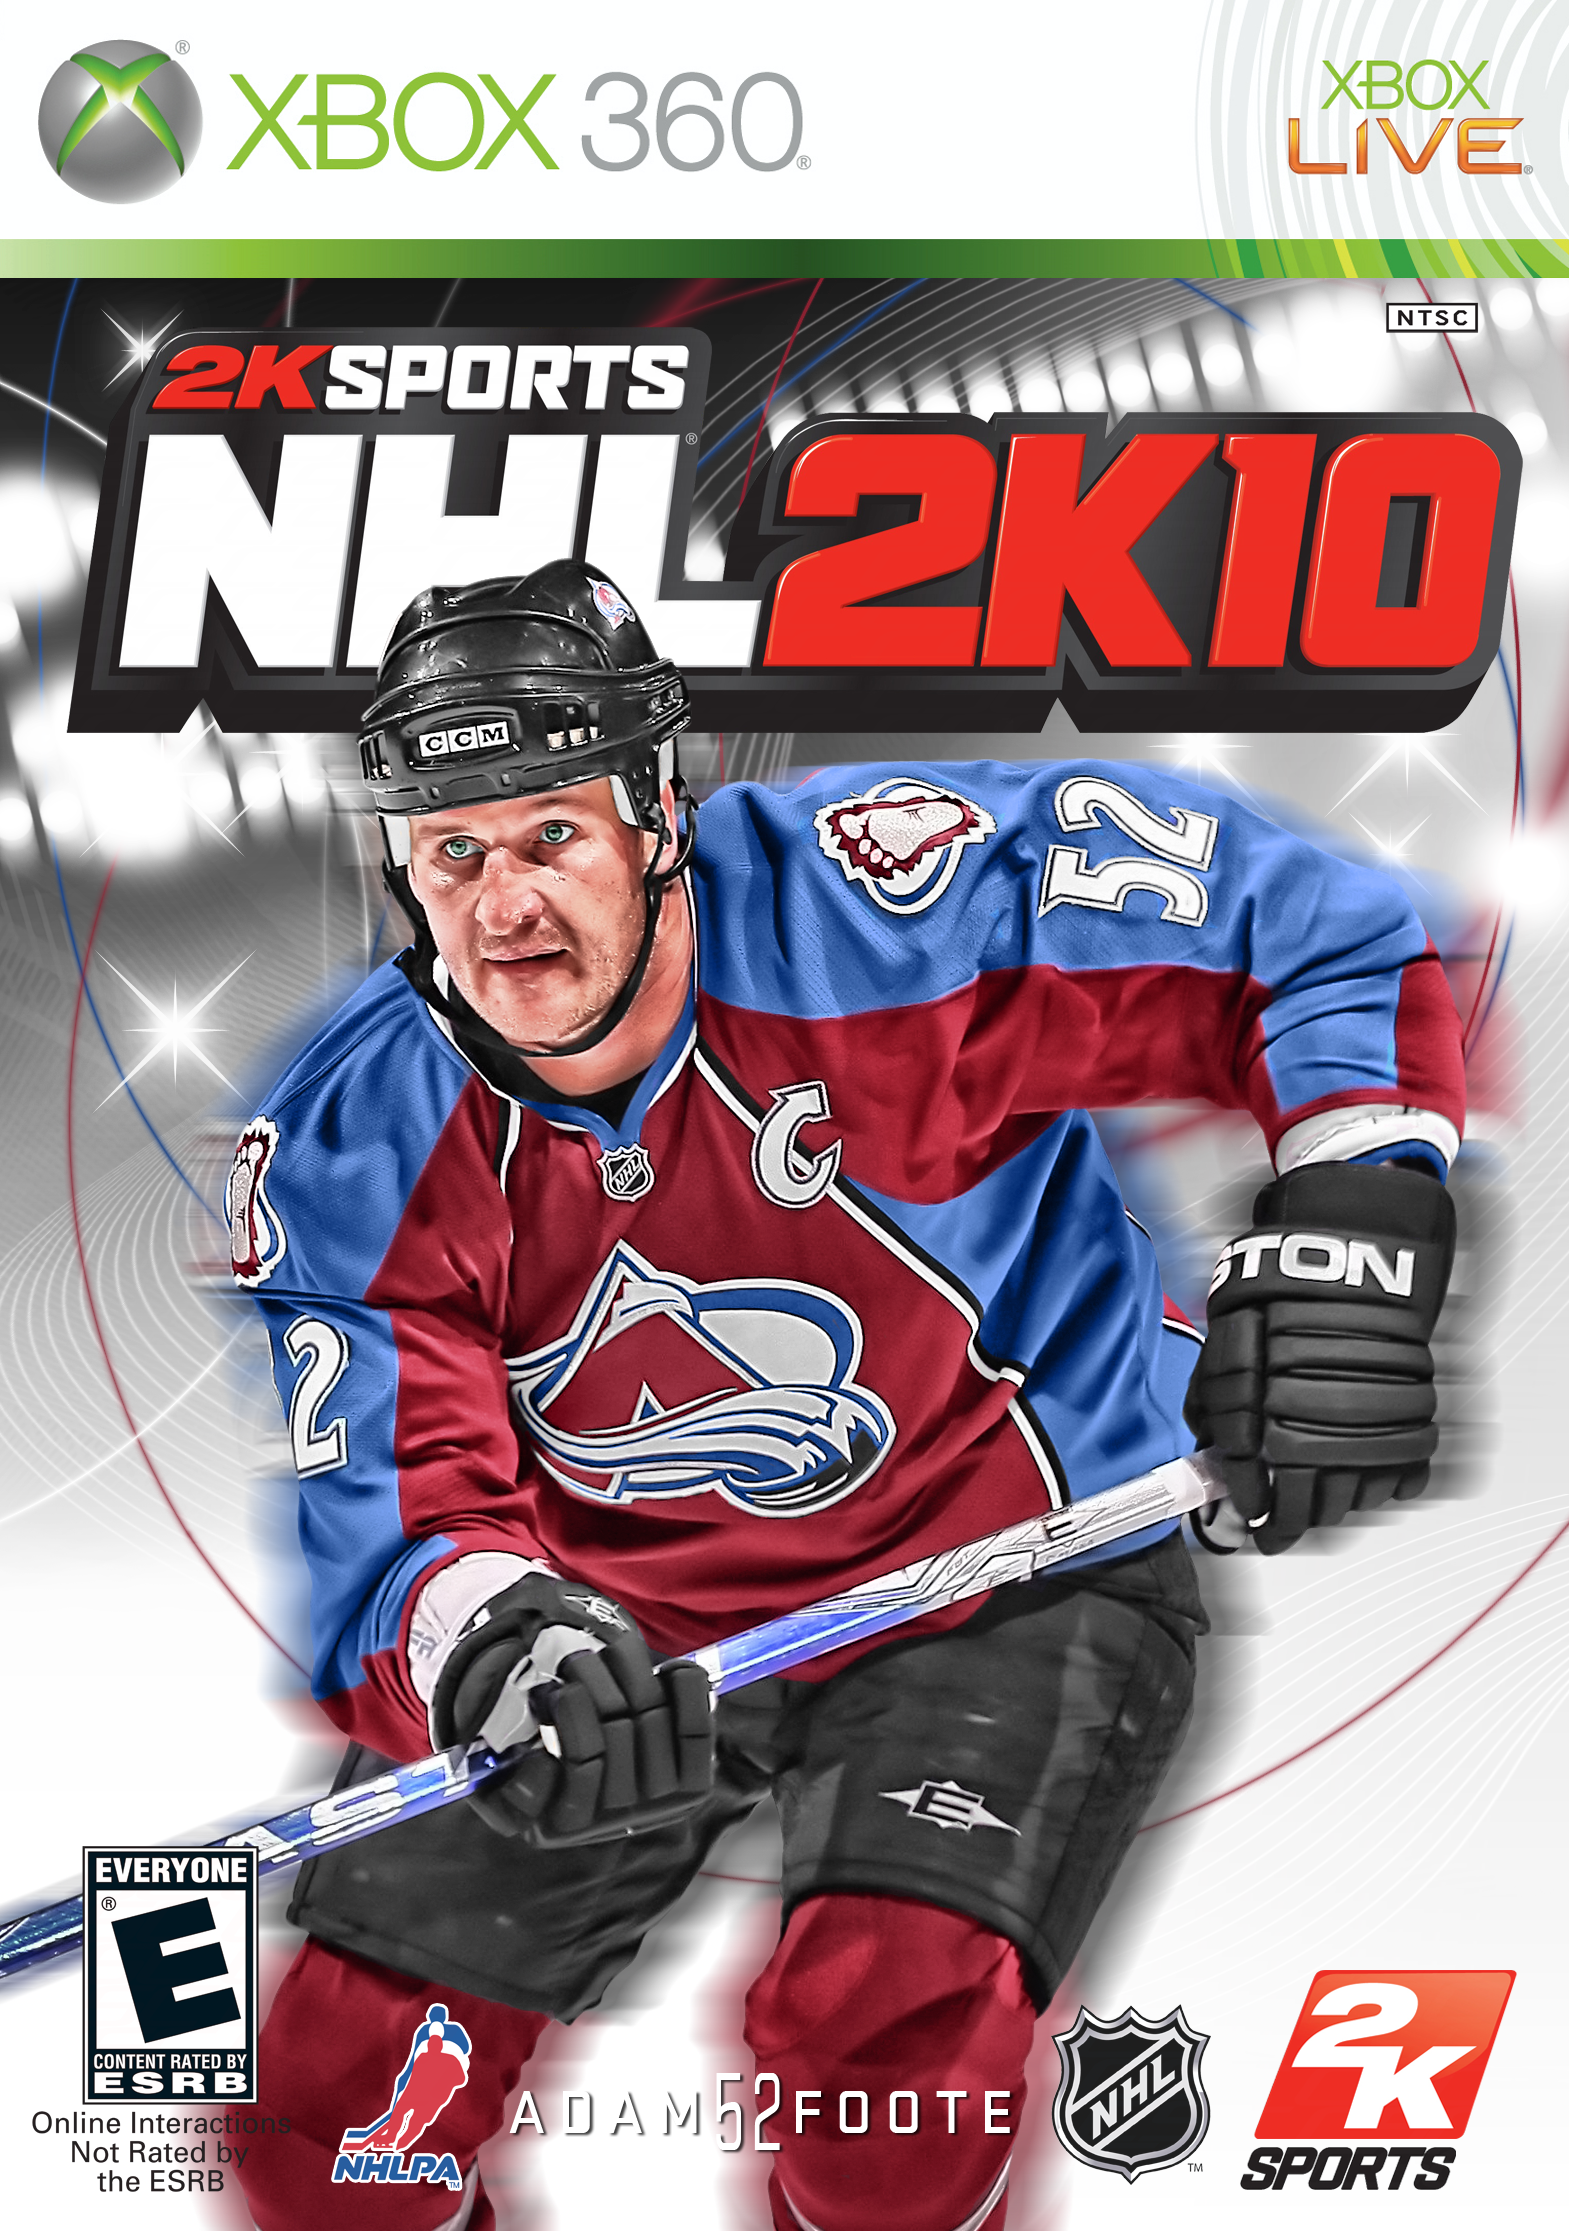 Adam Foote 2K10 Cover by CSC NHL 2K Photo album by CustomSportsCovers